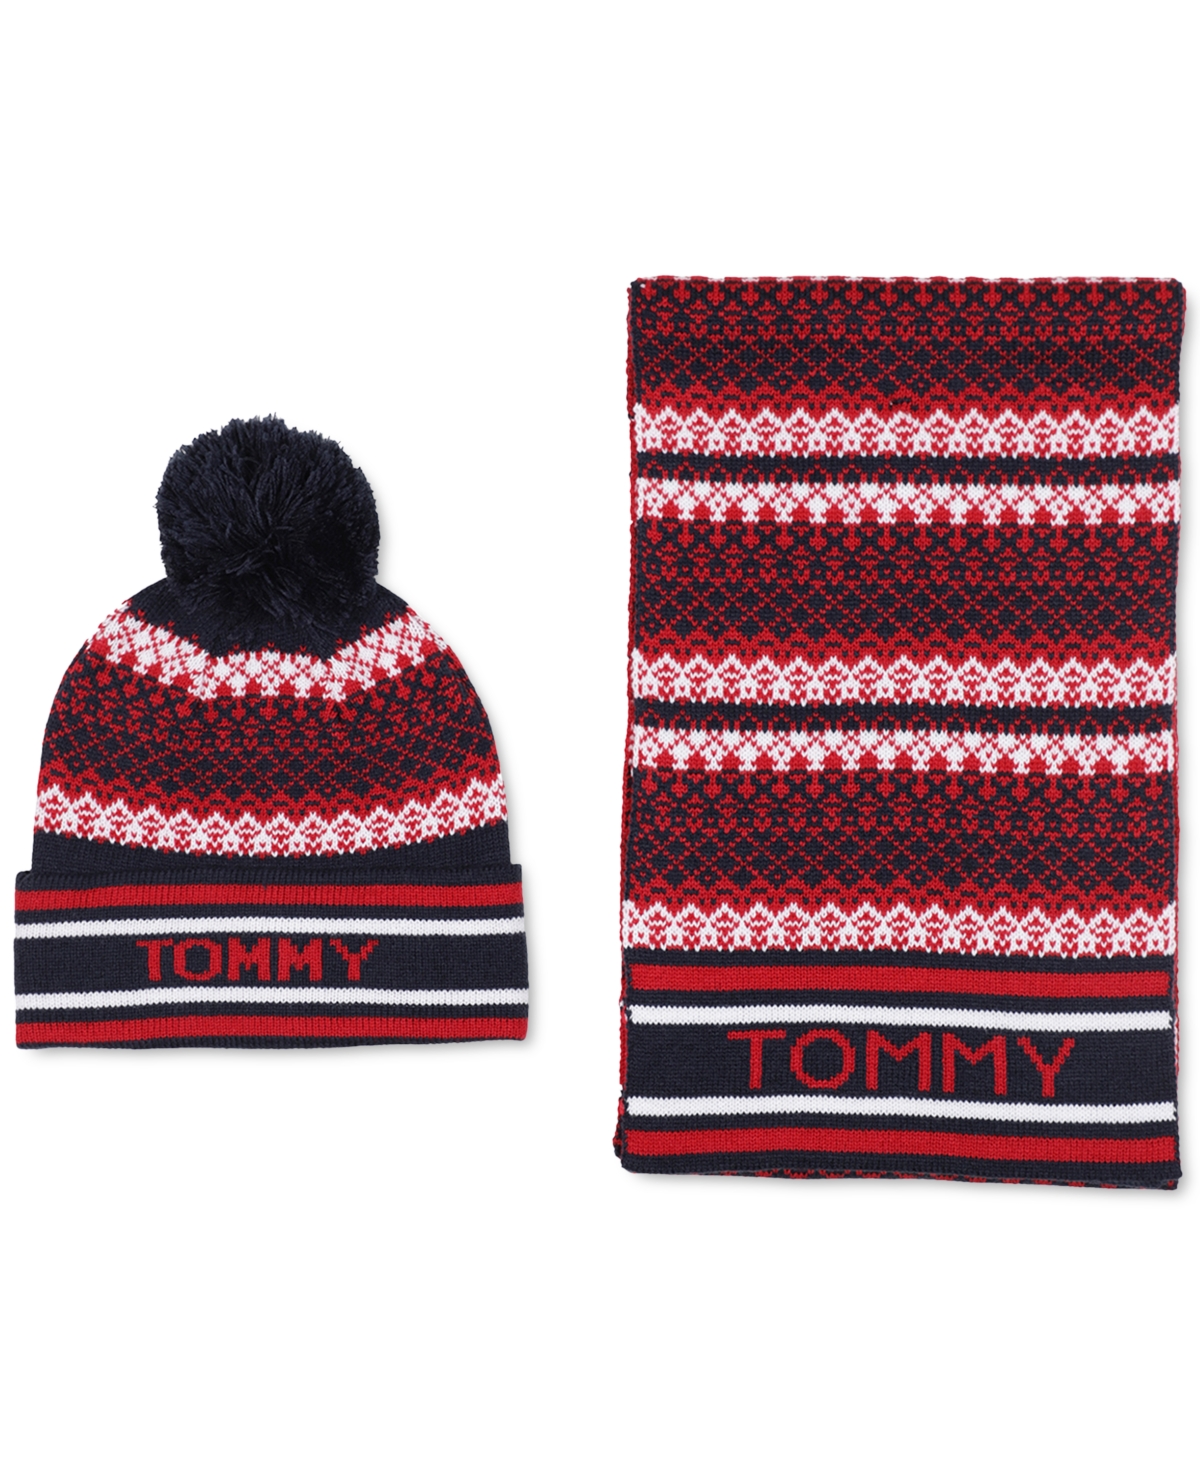 Tommy Hilfiger Men's Fair Isle Hat & Scarf Set In Sky Captain,apple Red,snow White